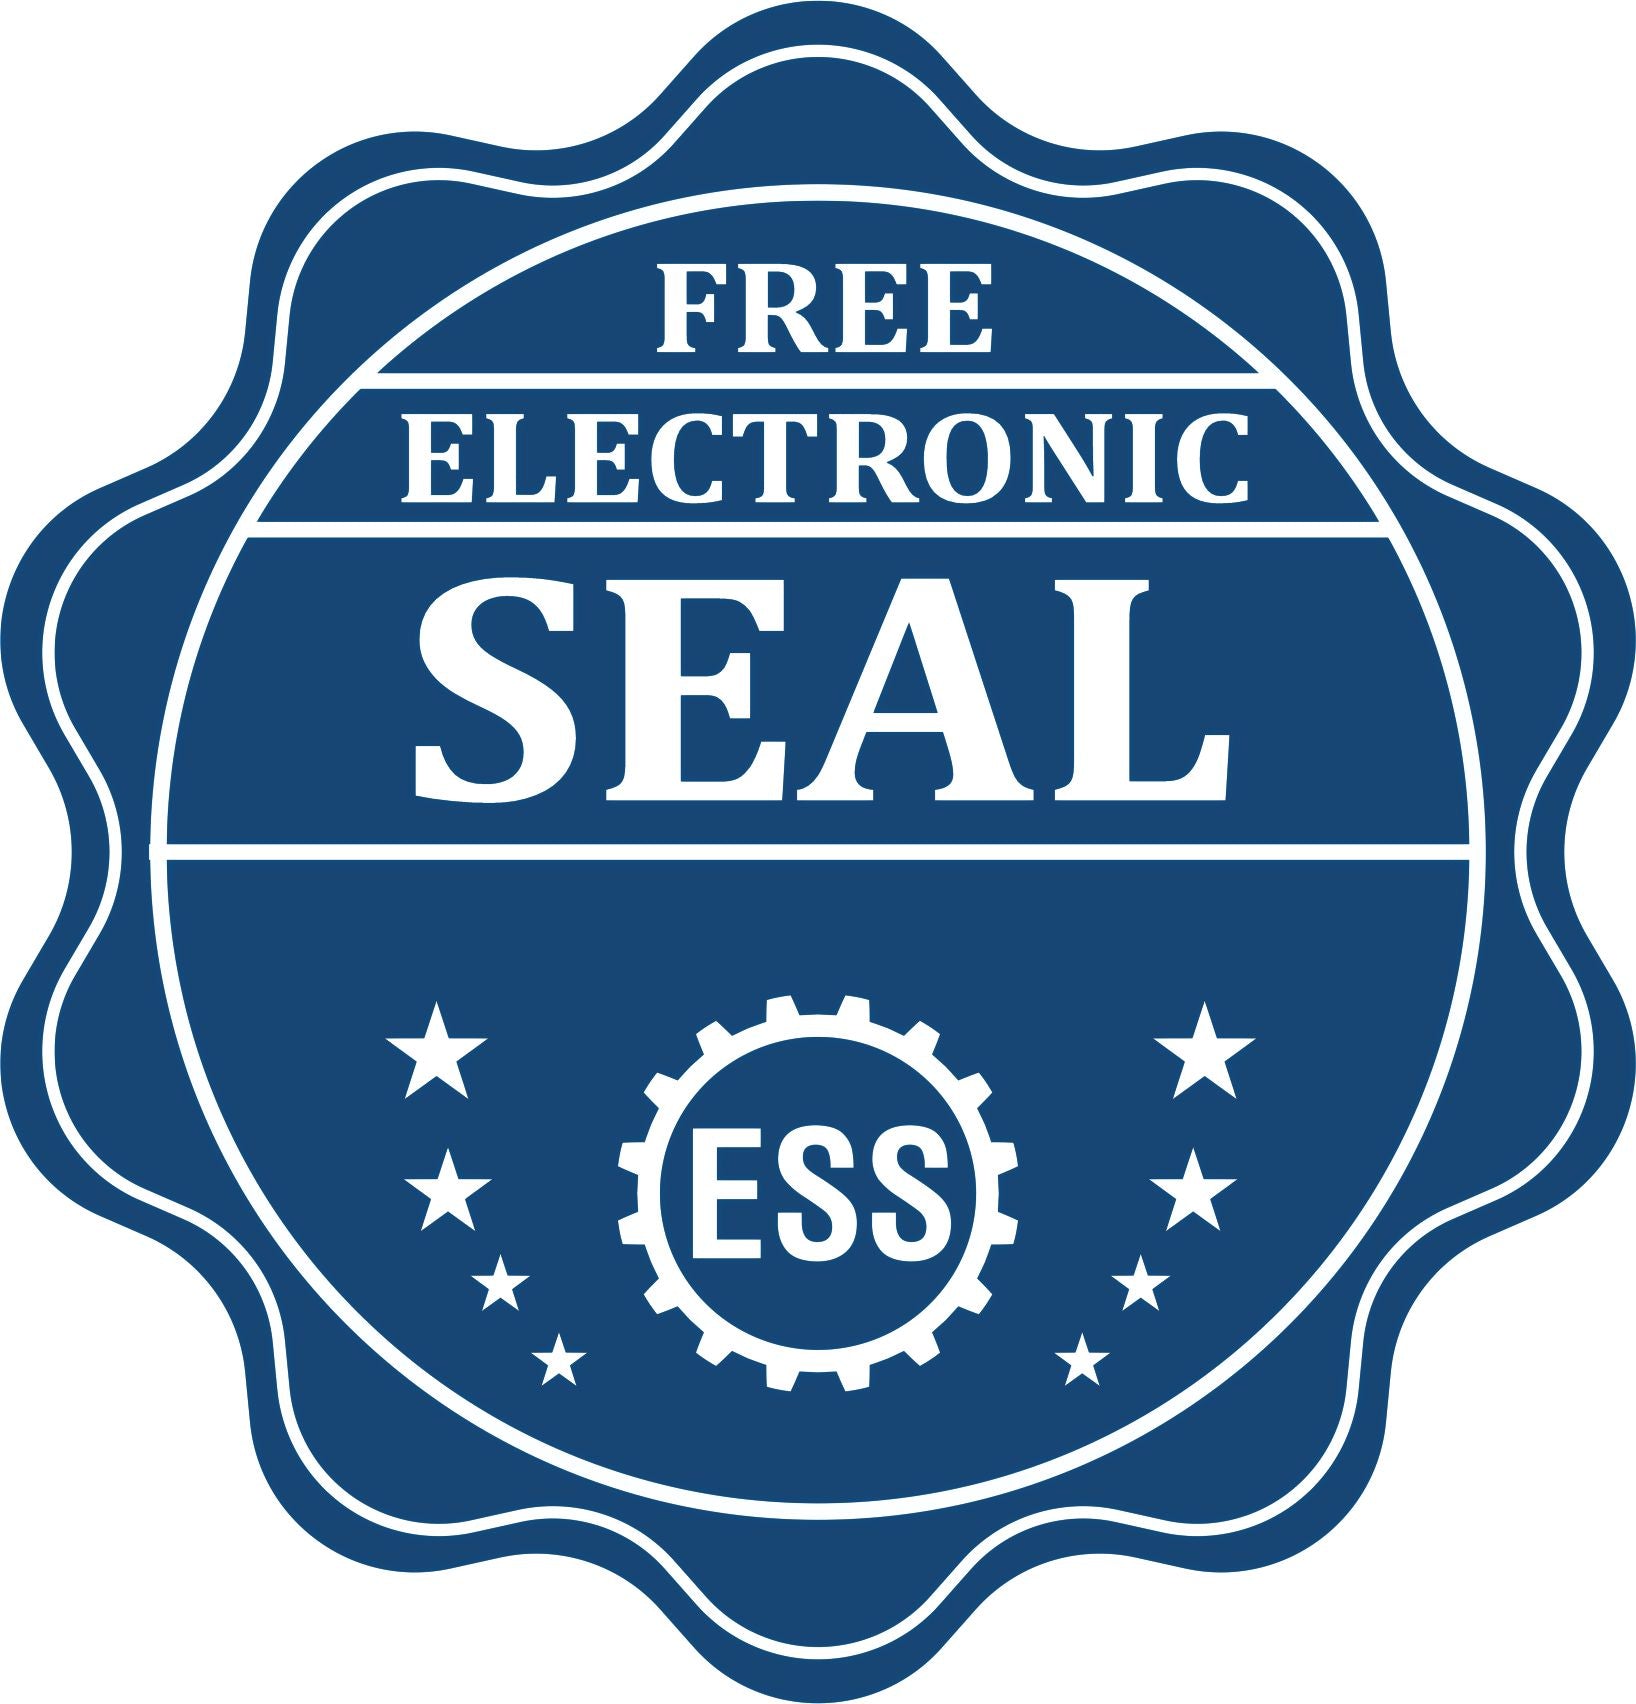 A badge showing a free electronic seal for the Slim Pre-Inked District of Columbia Landscape Architect Seal Stamp with stars and the ESS gear on the emblem.